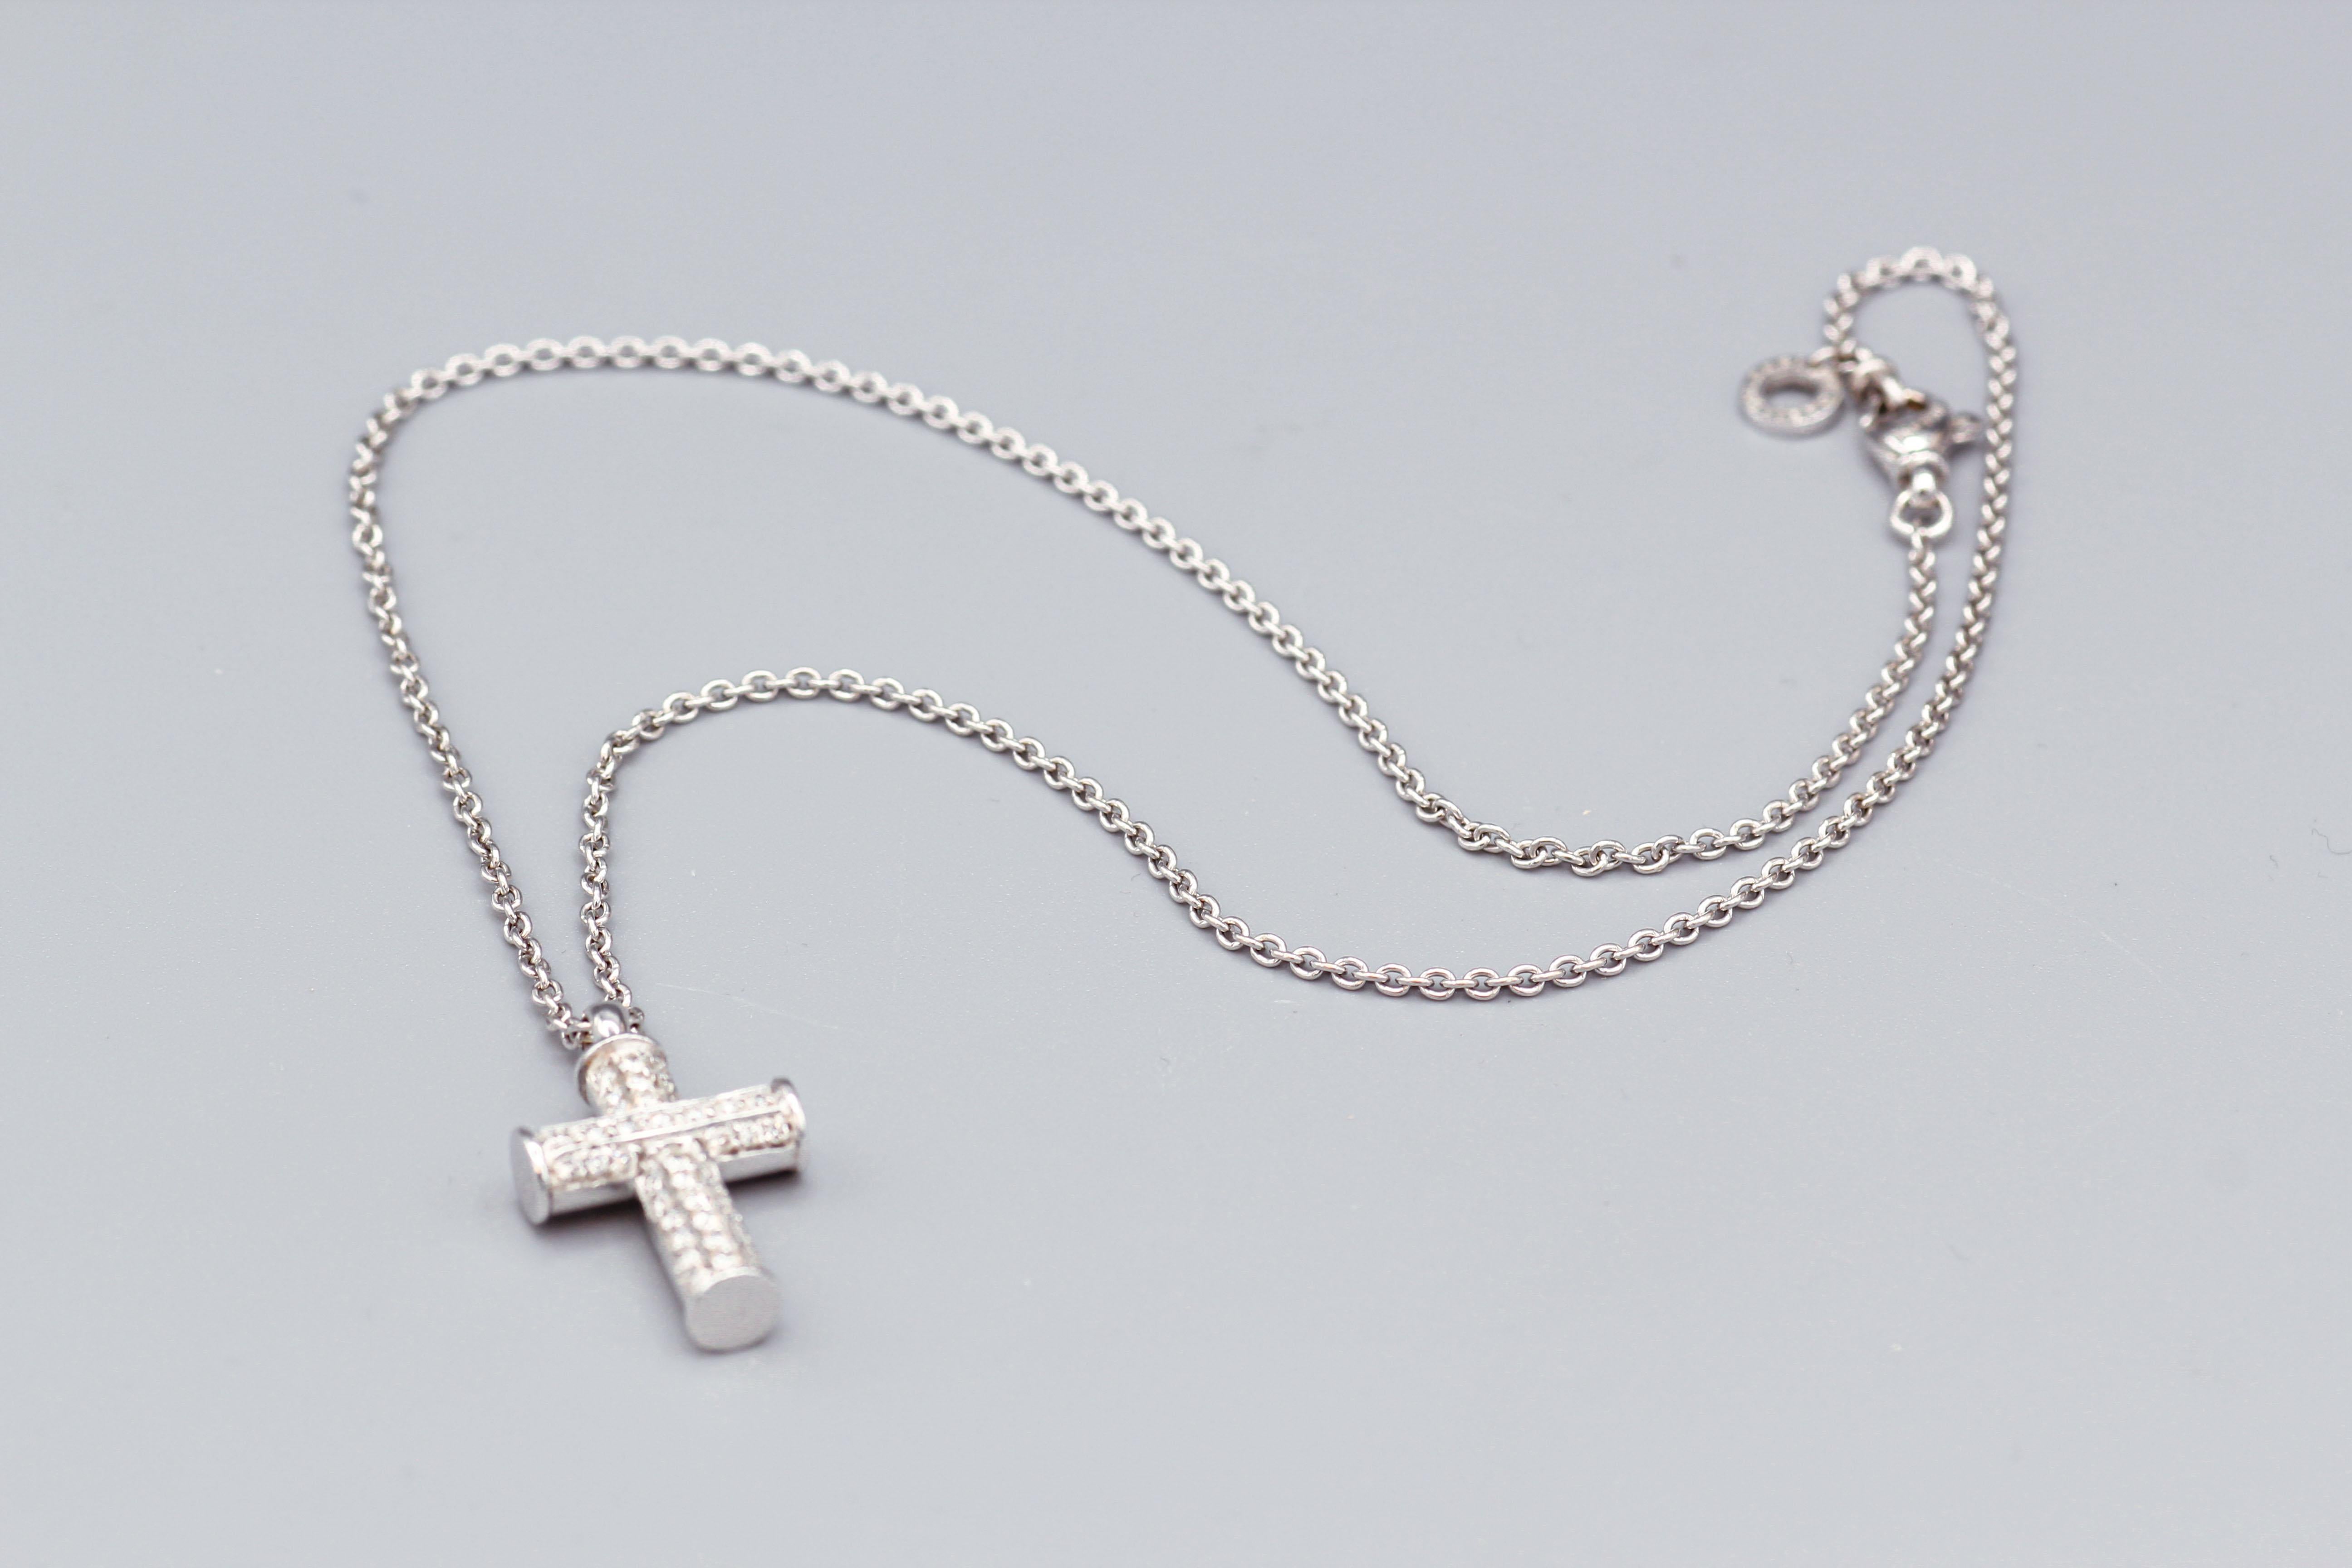 For your consideration, a fine Bulgari diamond and 18 Karat white gold cross pendant necklace, a beautiful piece of fine jewelry that features many design elements.  The necklace is made of high-quality 18 karat white gold, which is a precious and